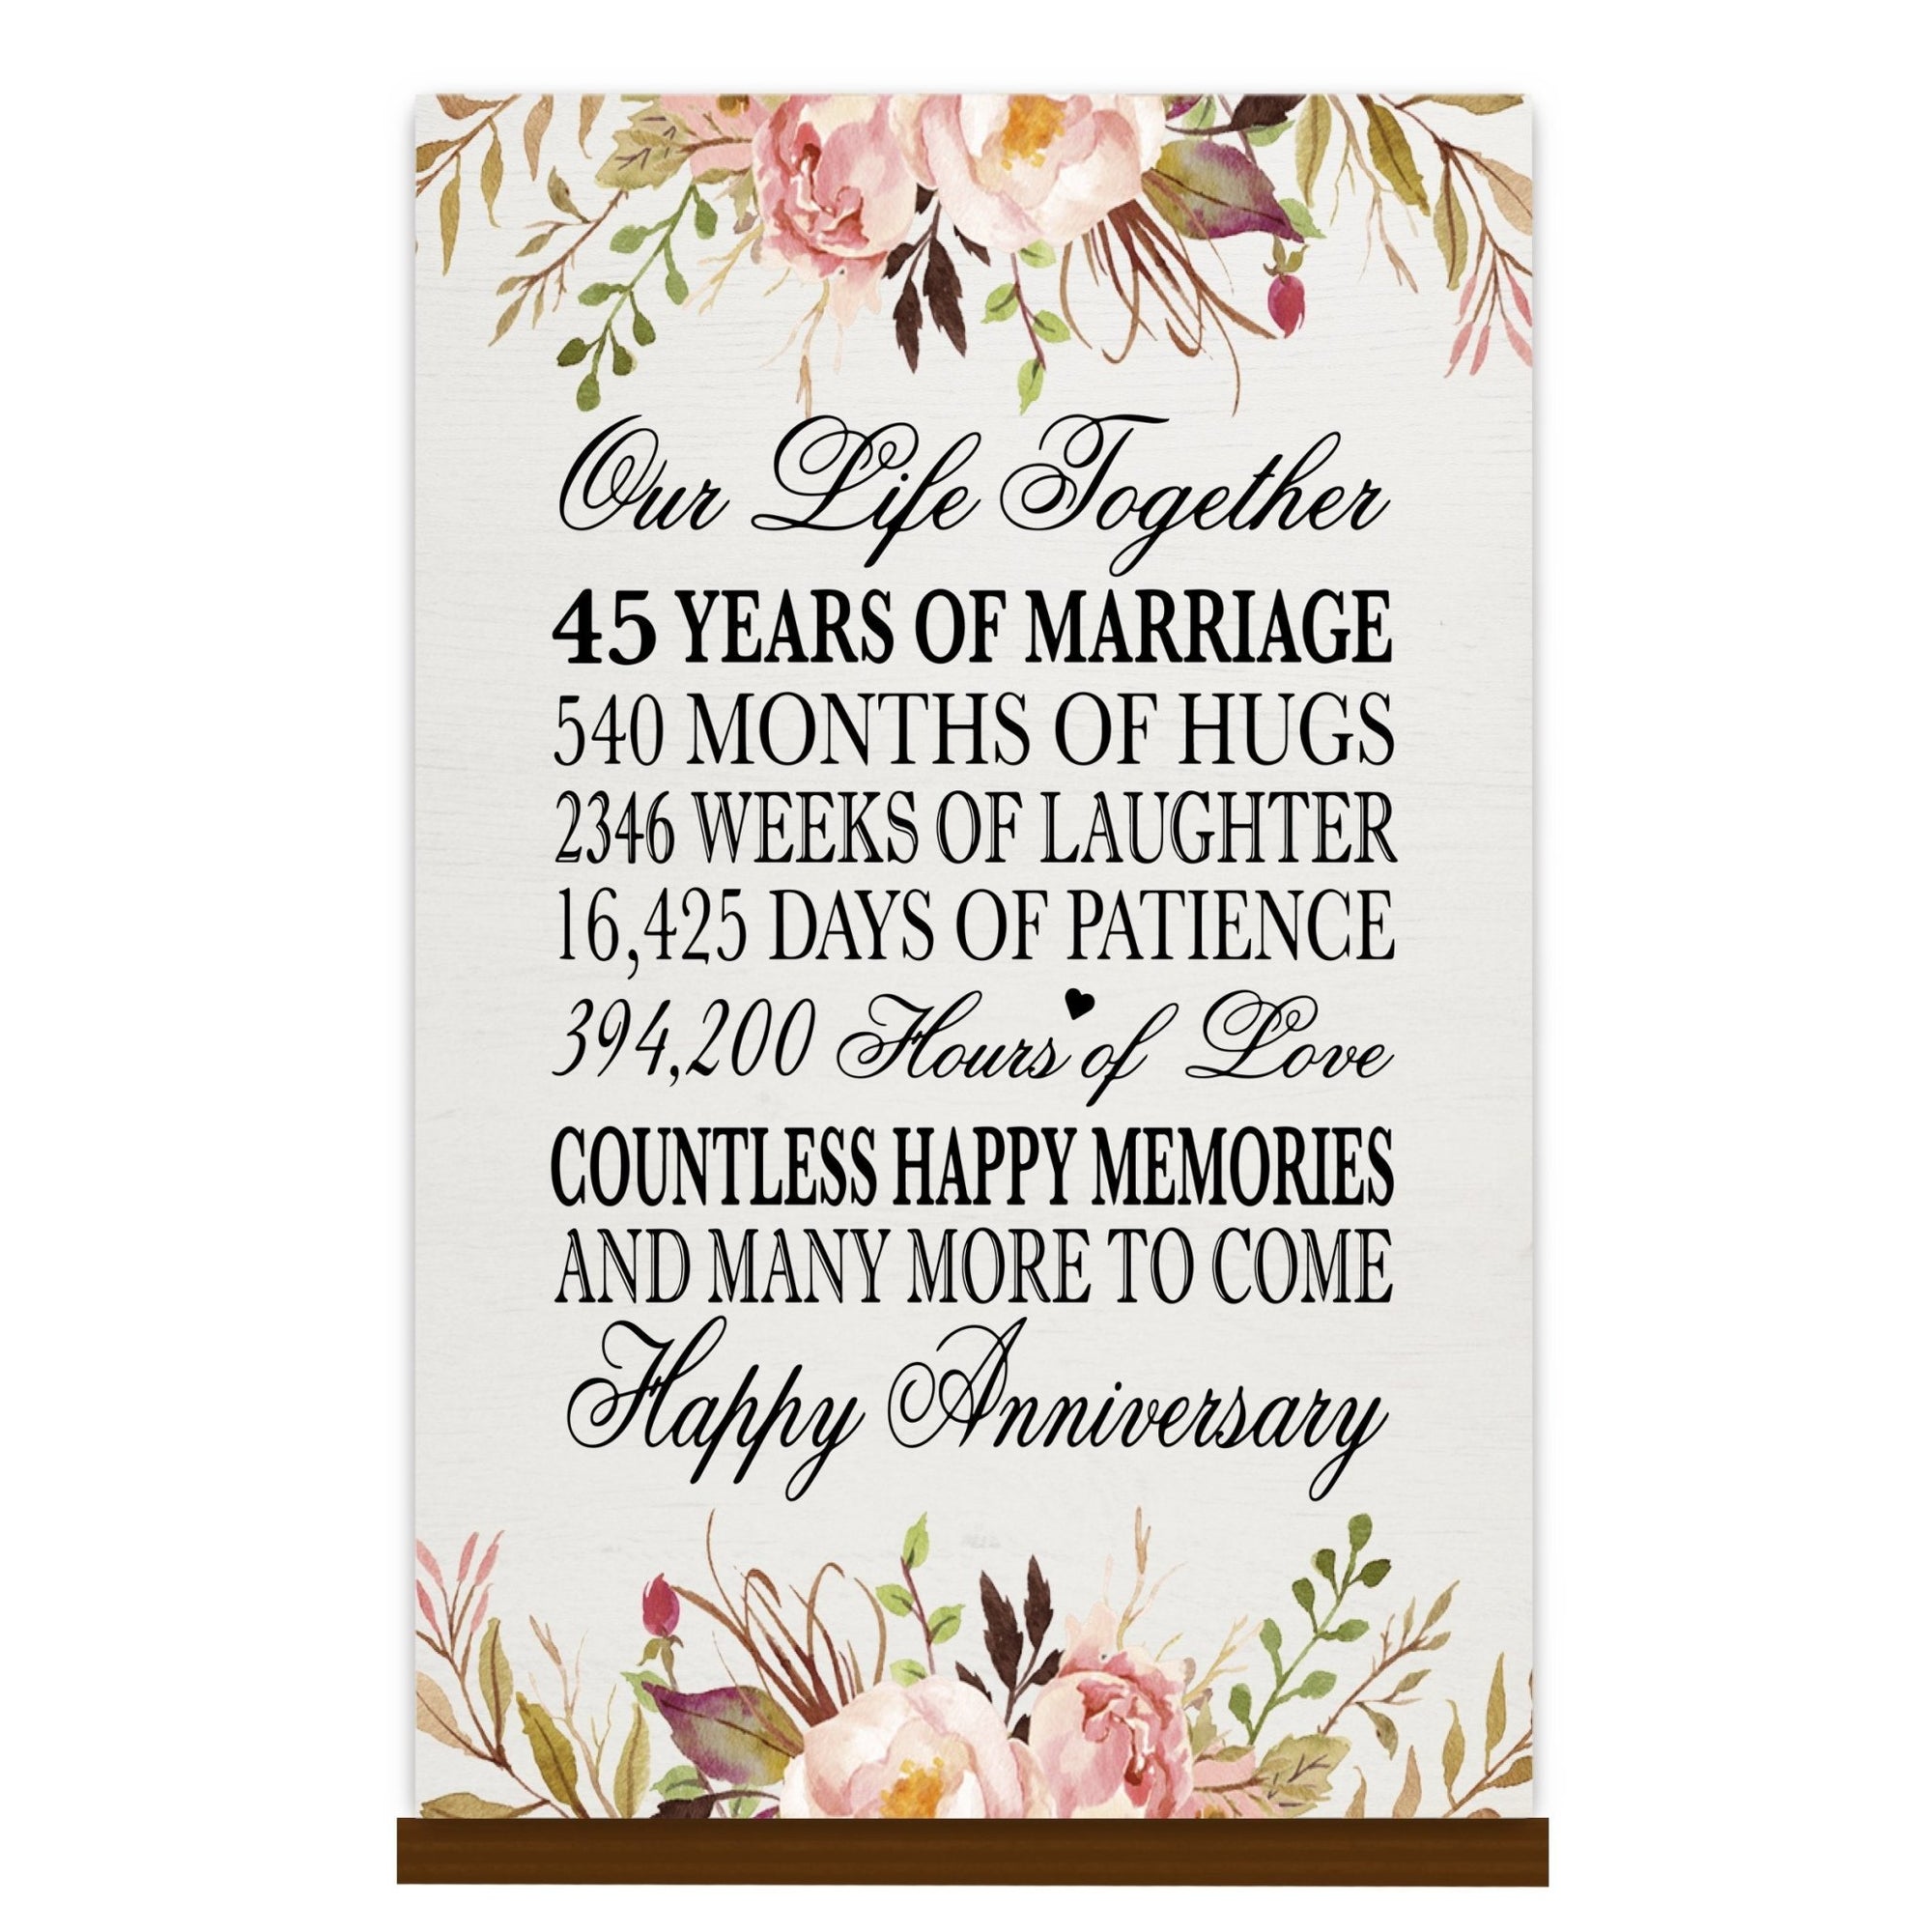 LifeSong Milestones 45th Anniversary Wall Plaque for Couples